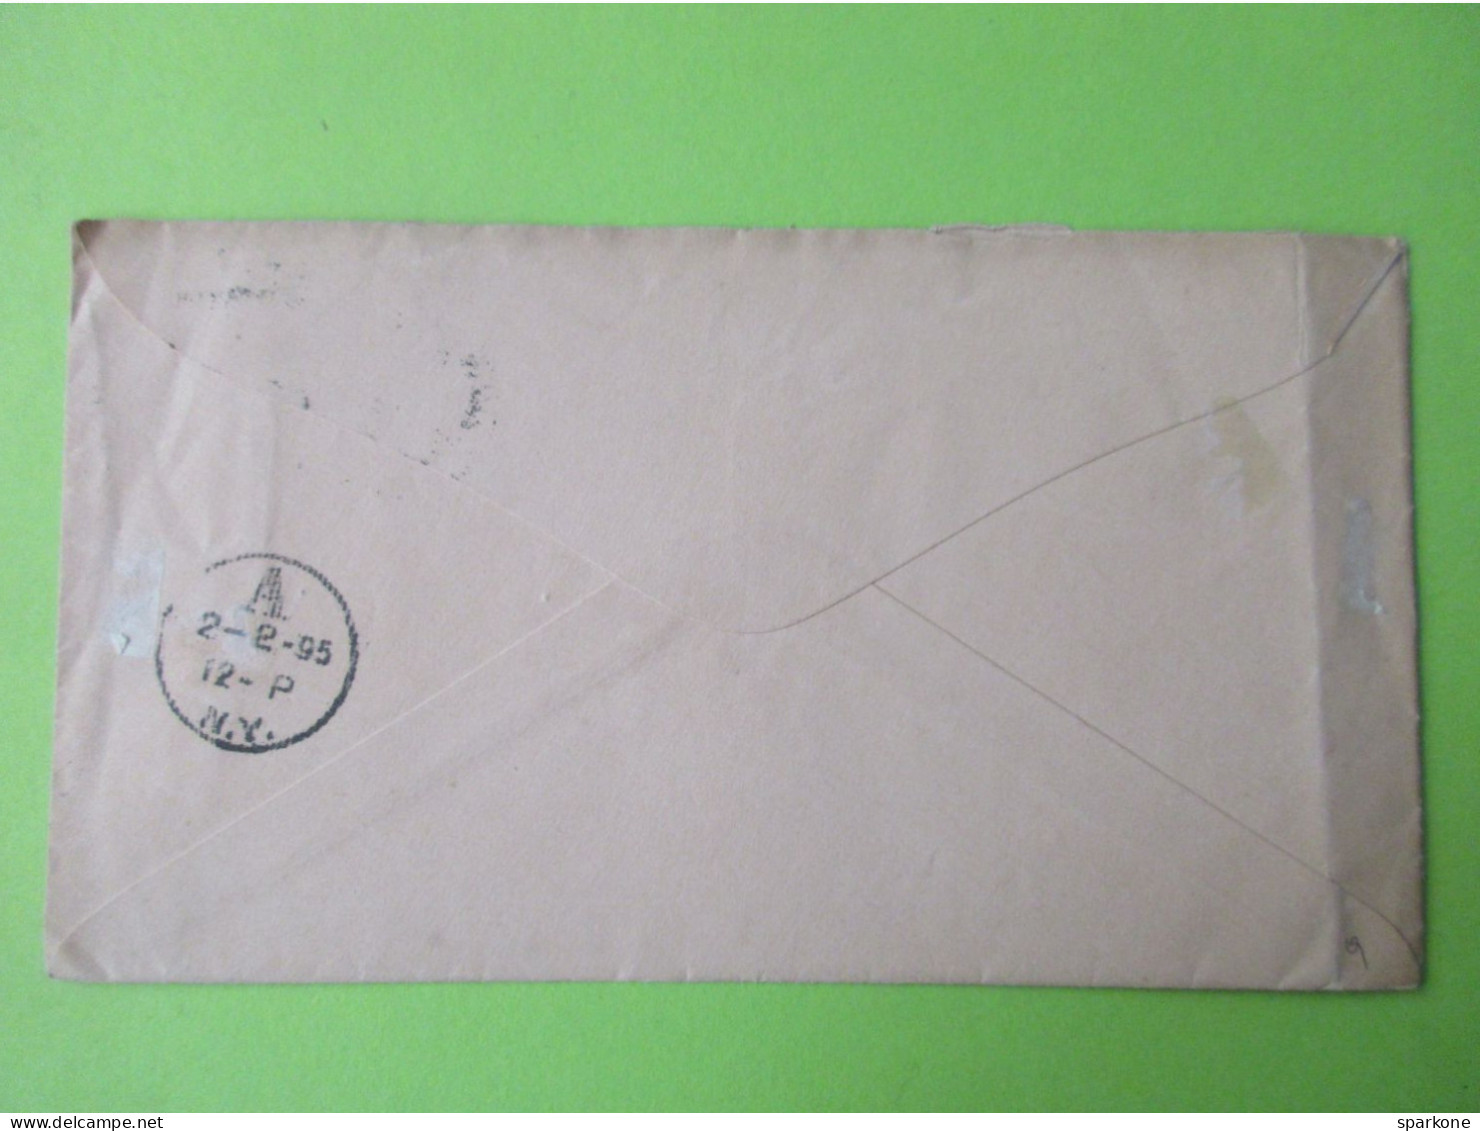 Marcophilie - Enveloppe - Dodd, Mead & Compagny - New York - Postal History